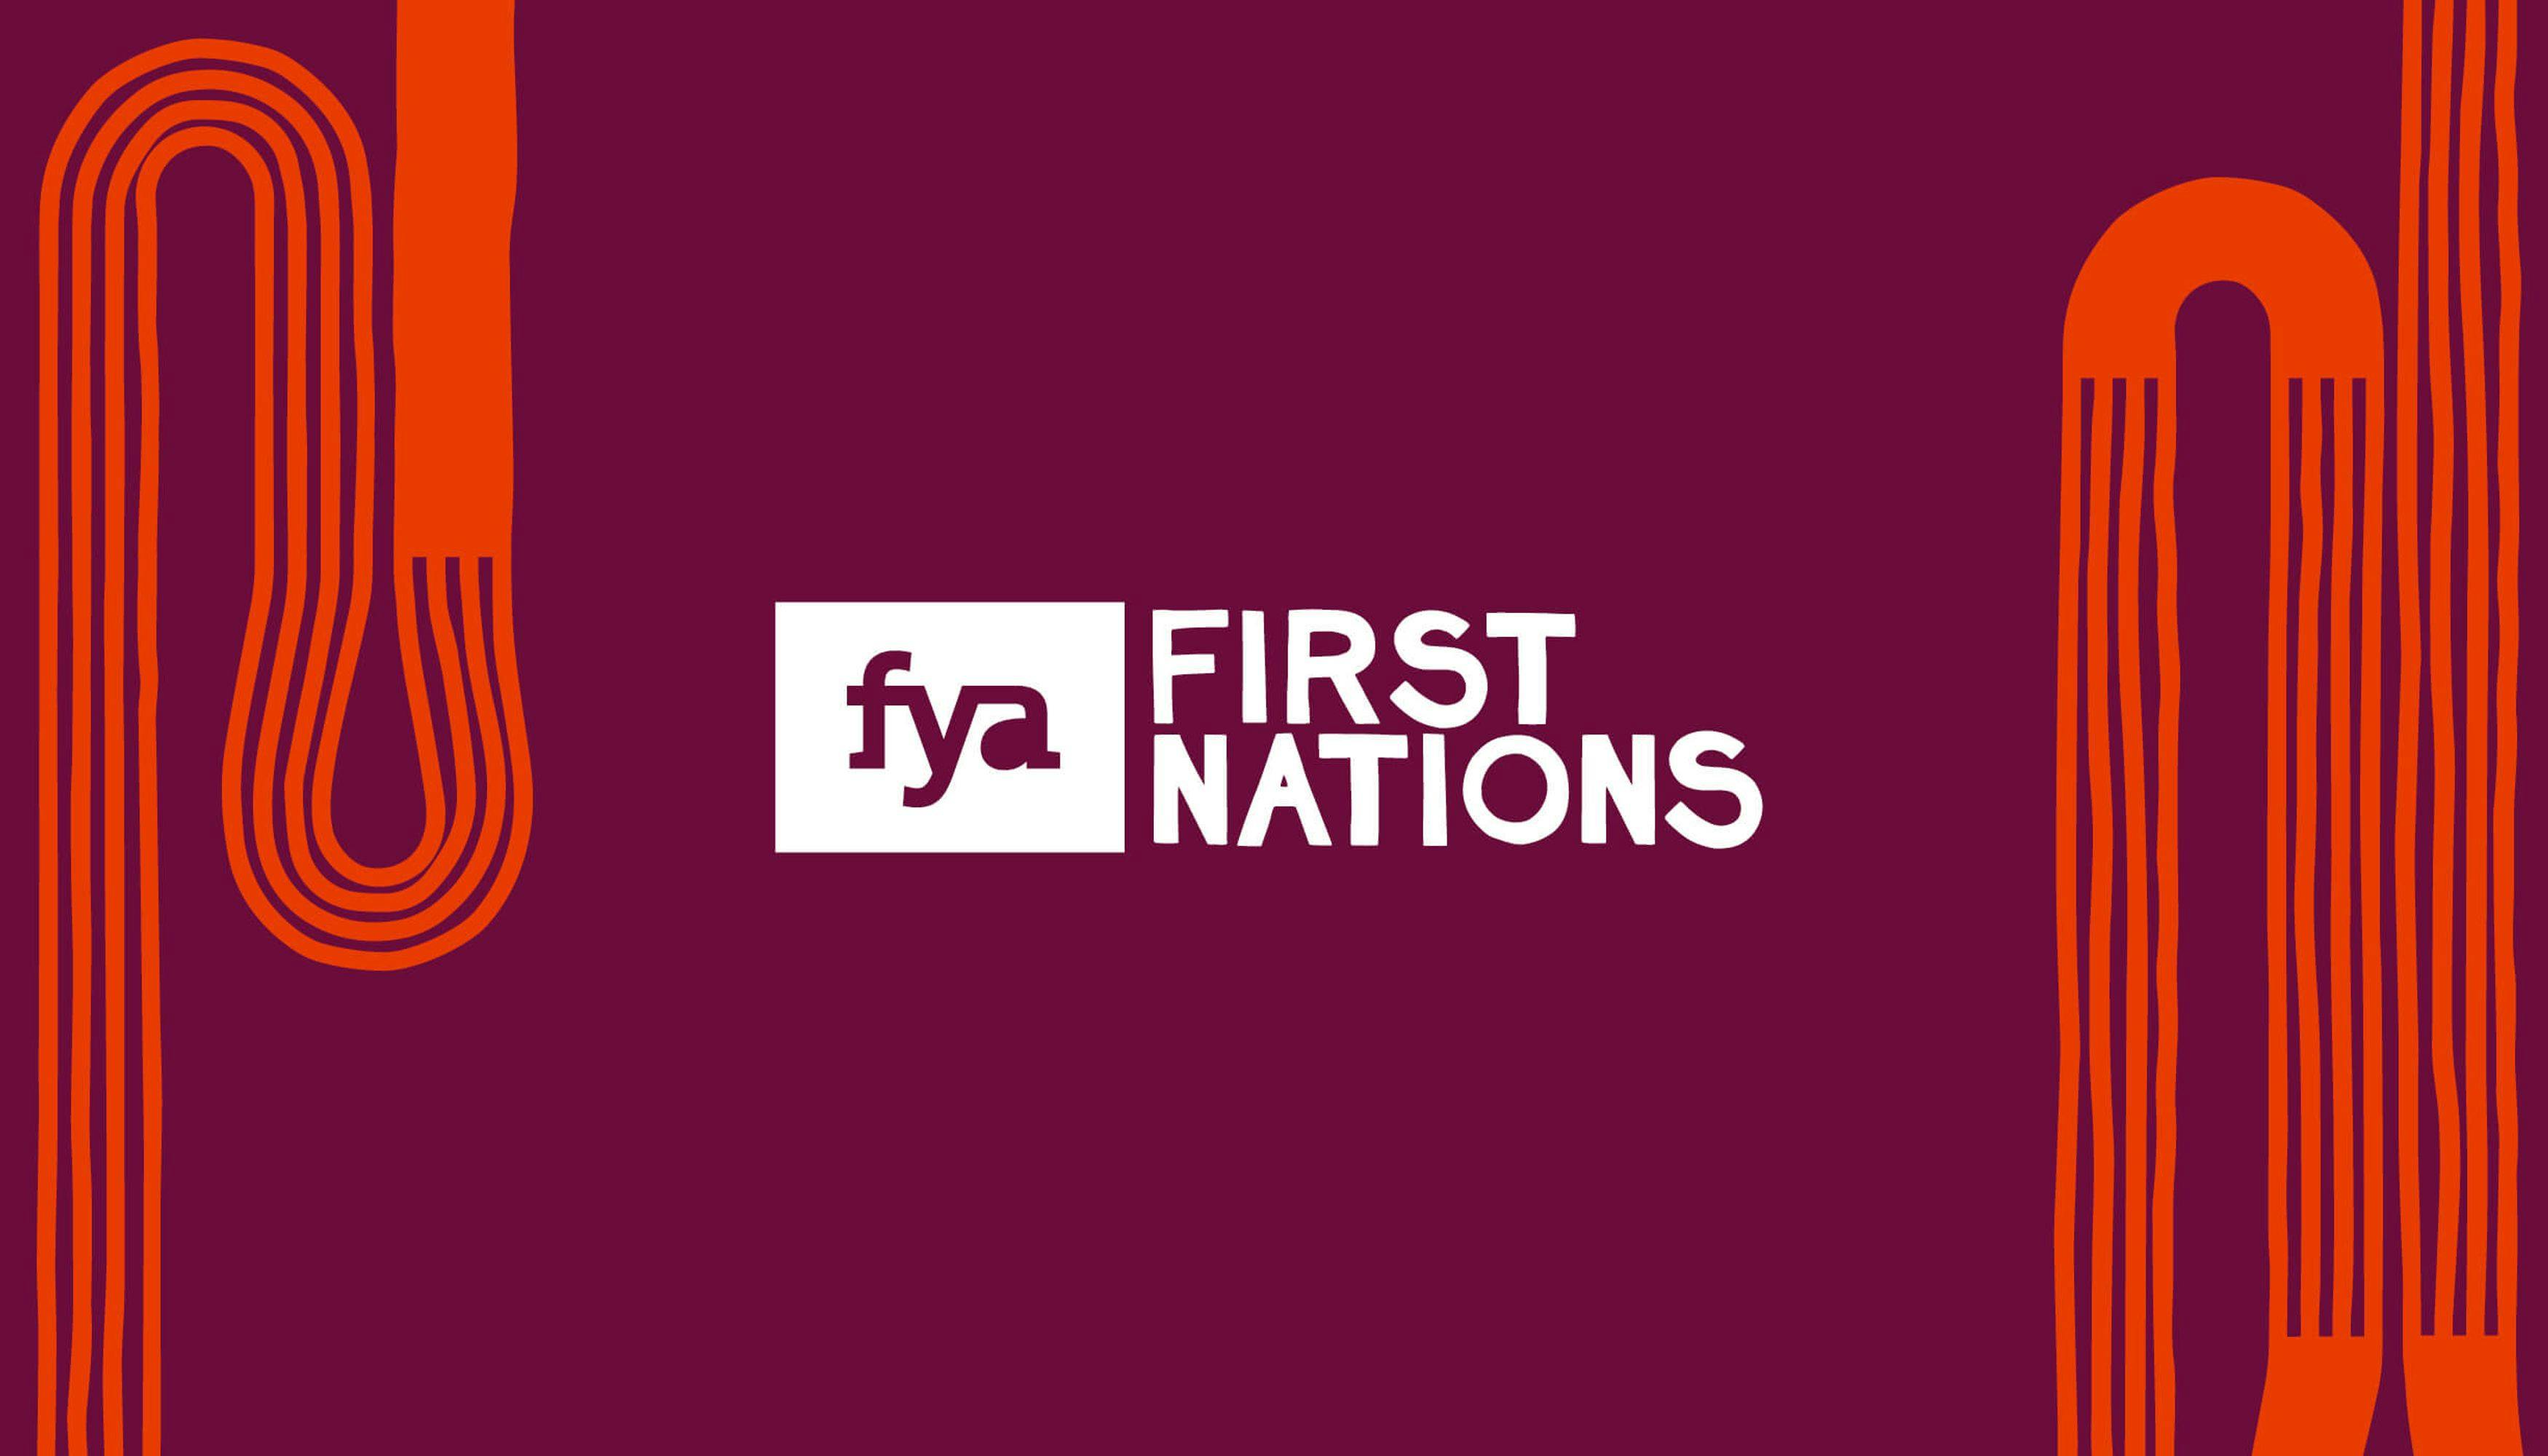 Cover image from The Foundation for Young Australians (FYA) brand identity